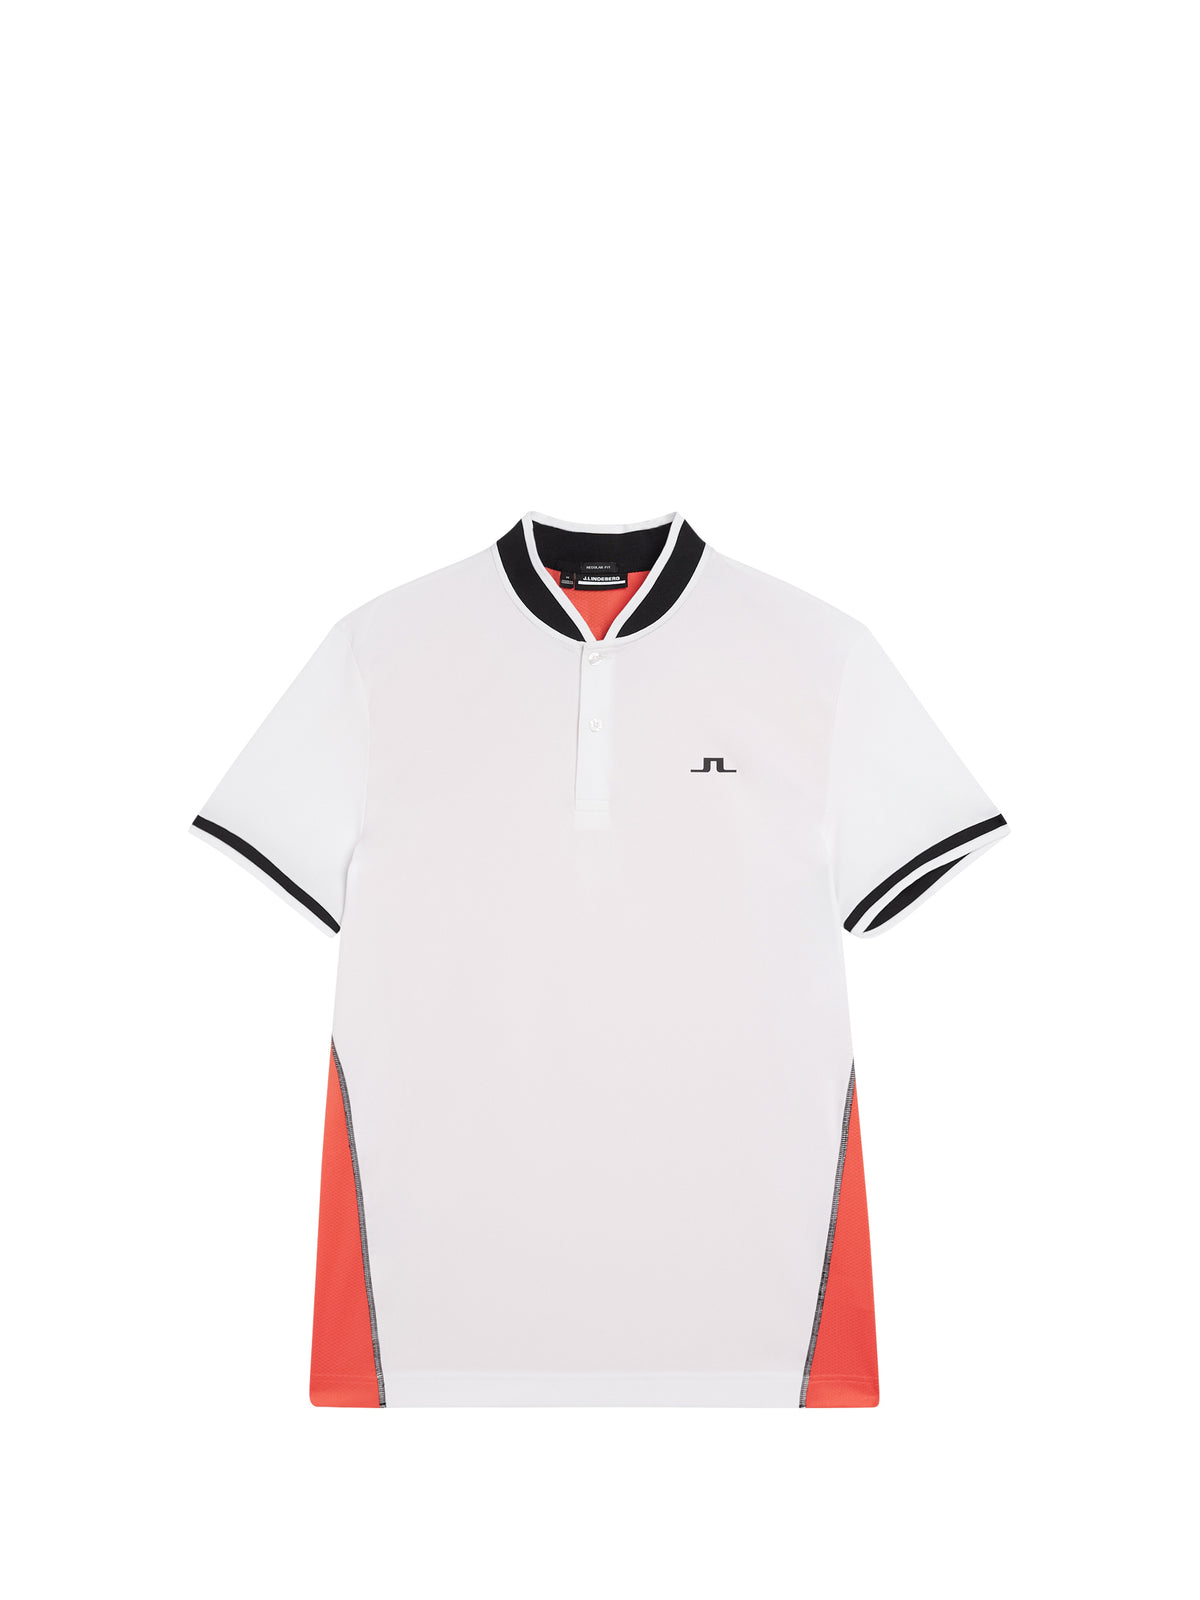 Jensen Regular Fit Polo / Hot Coral